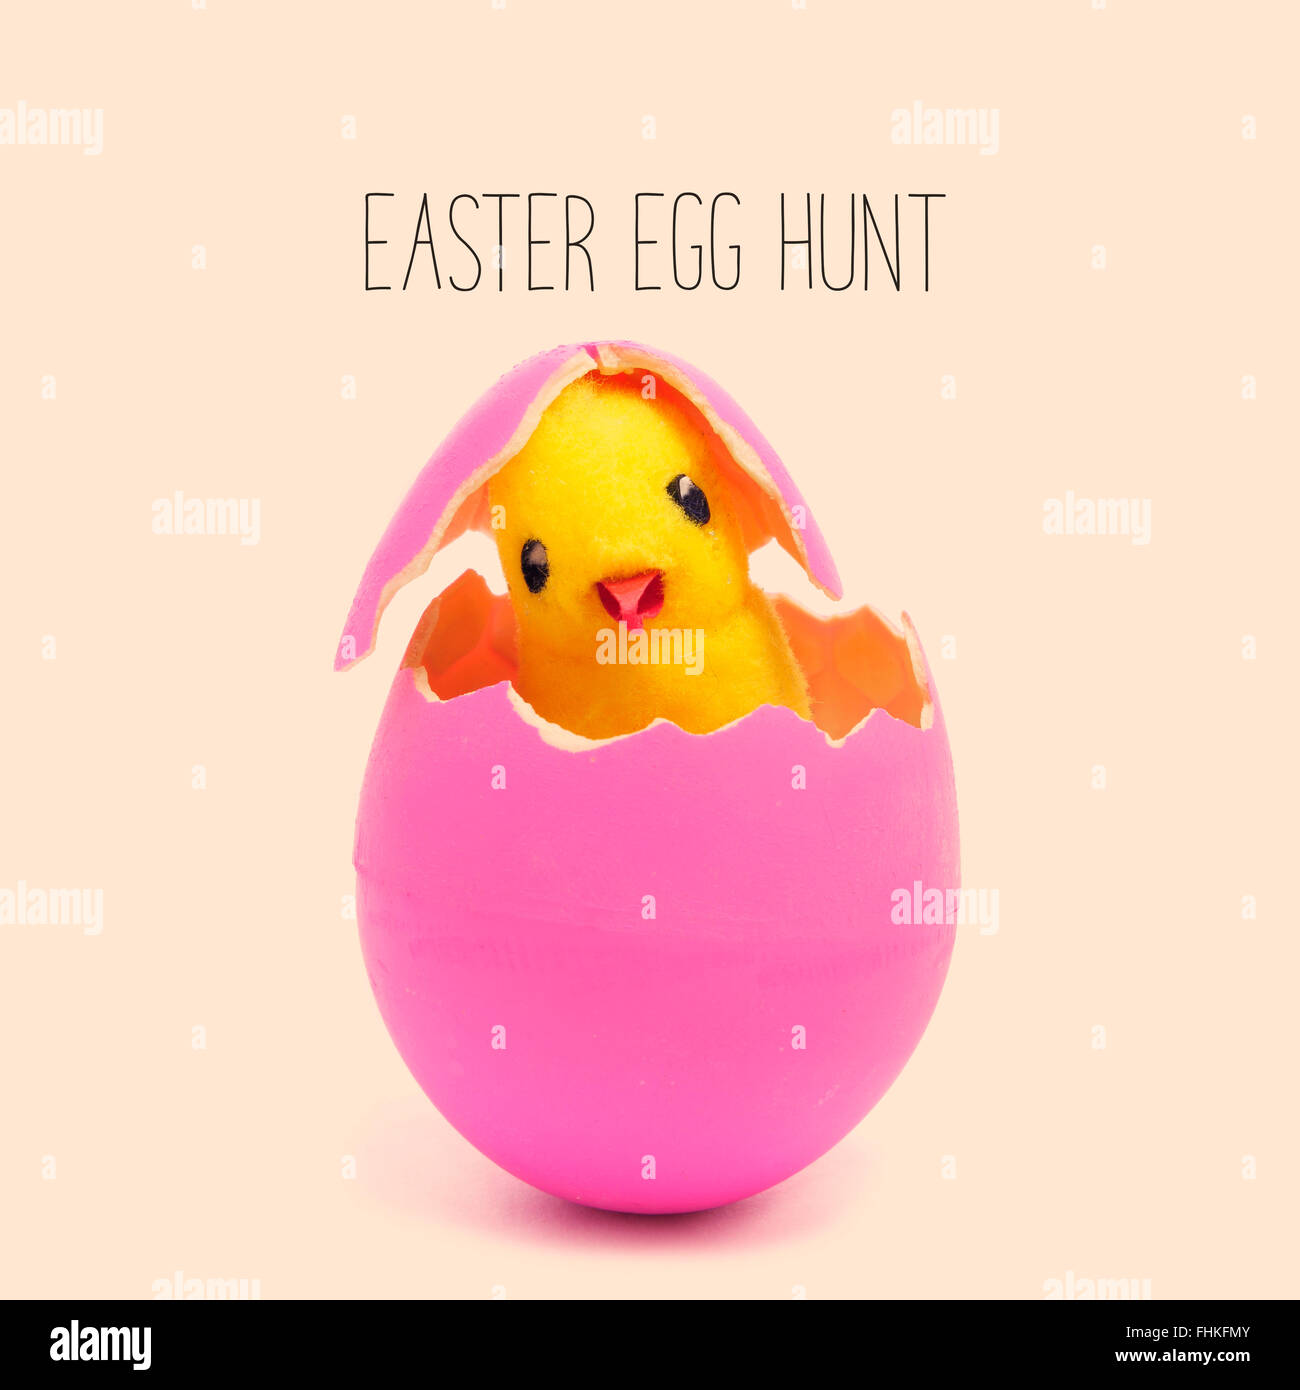 the text easter egg hunt and a teddy chick emerging from a hatched pink easter egg, against a pale pink background Stock Photo